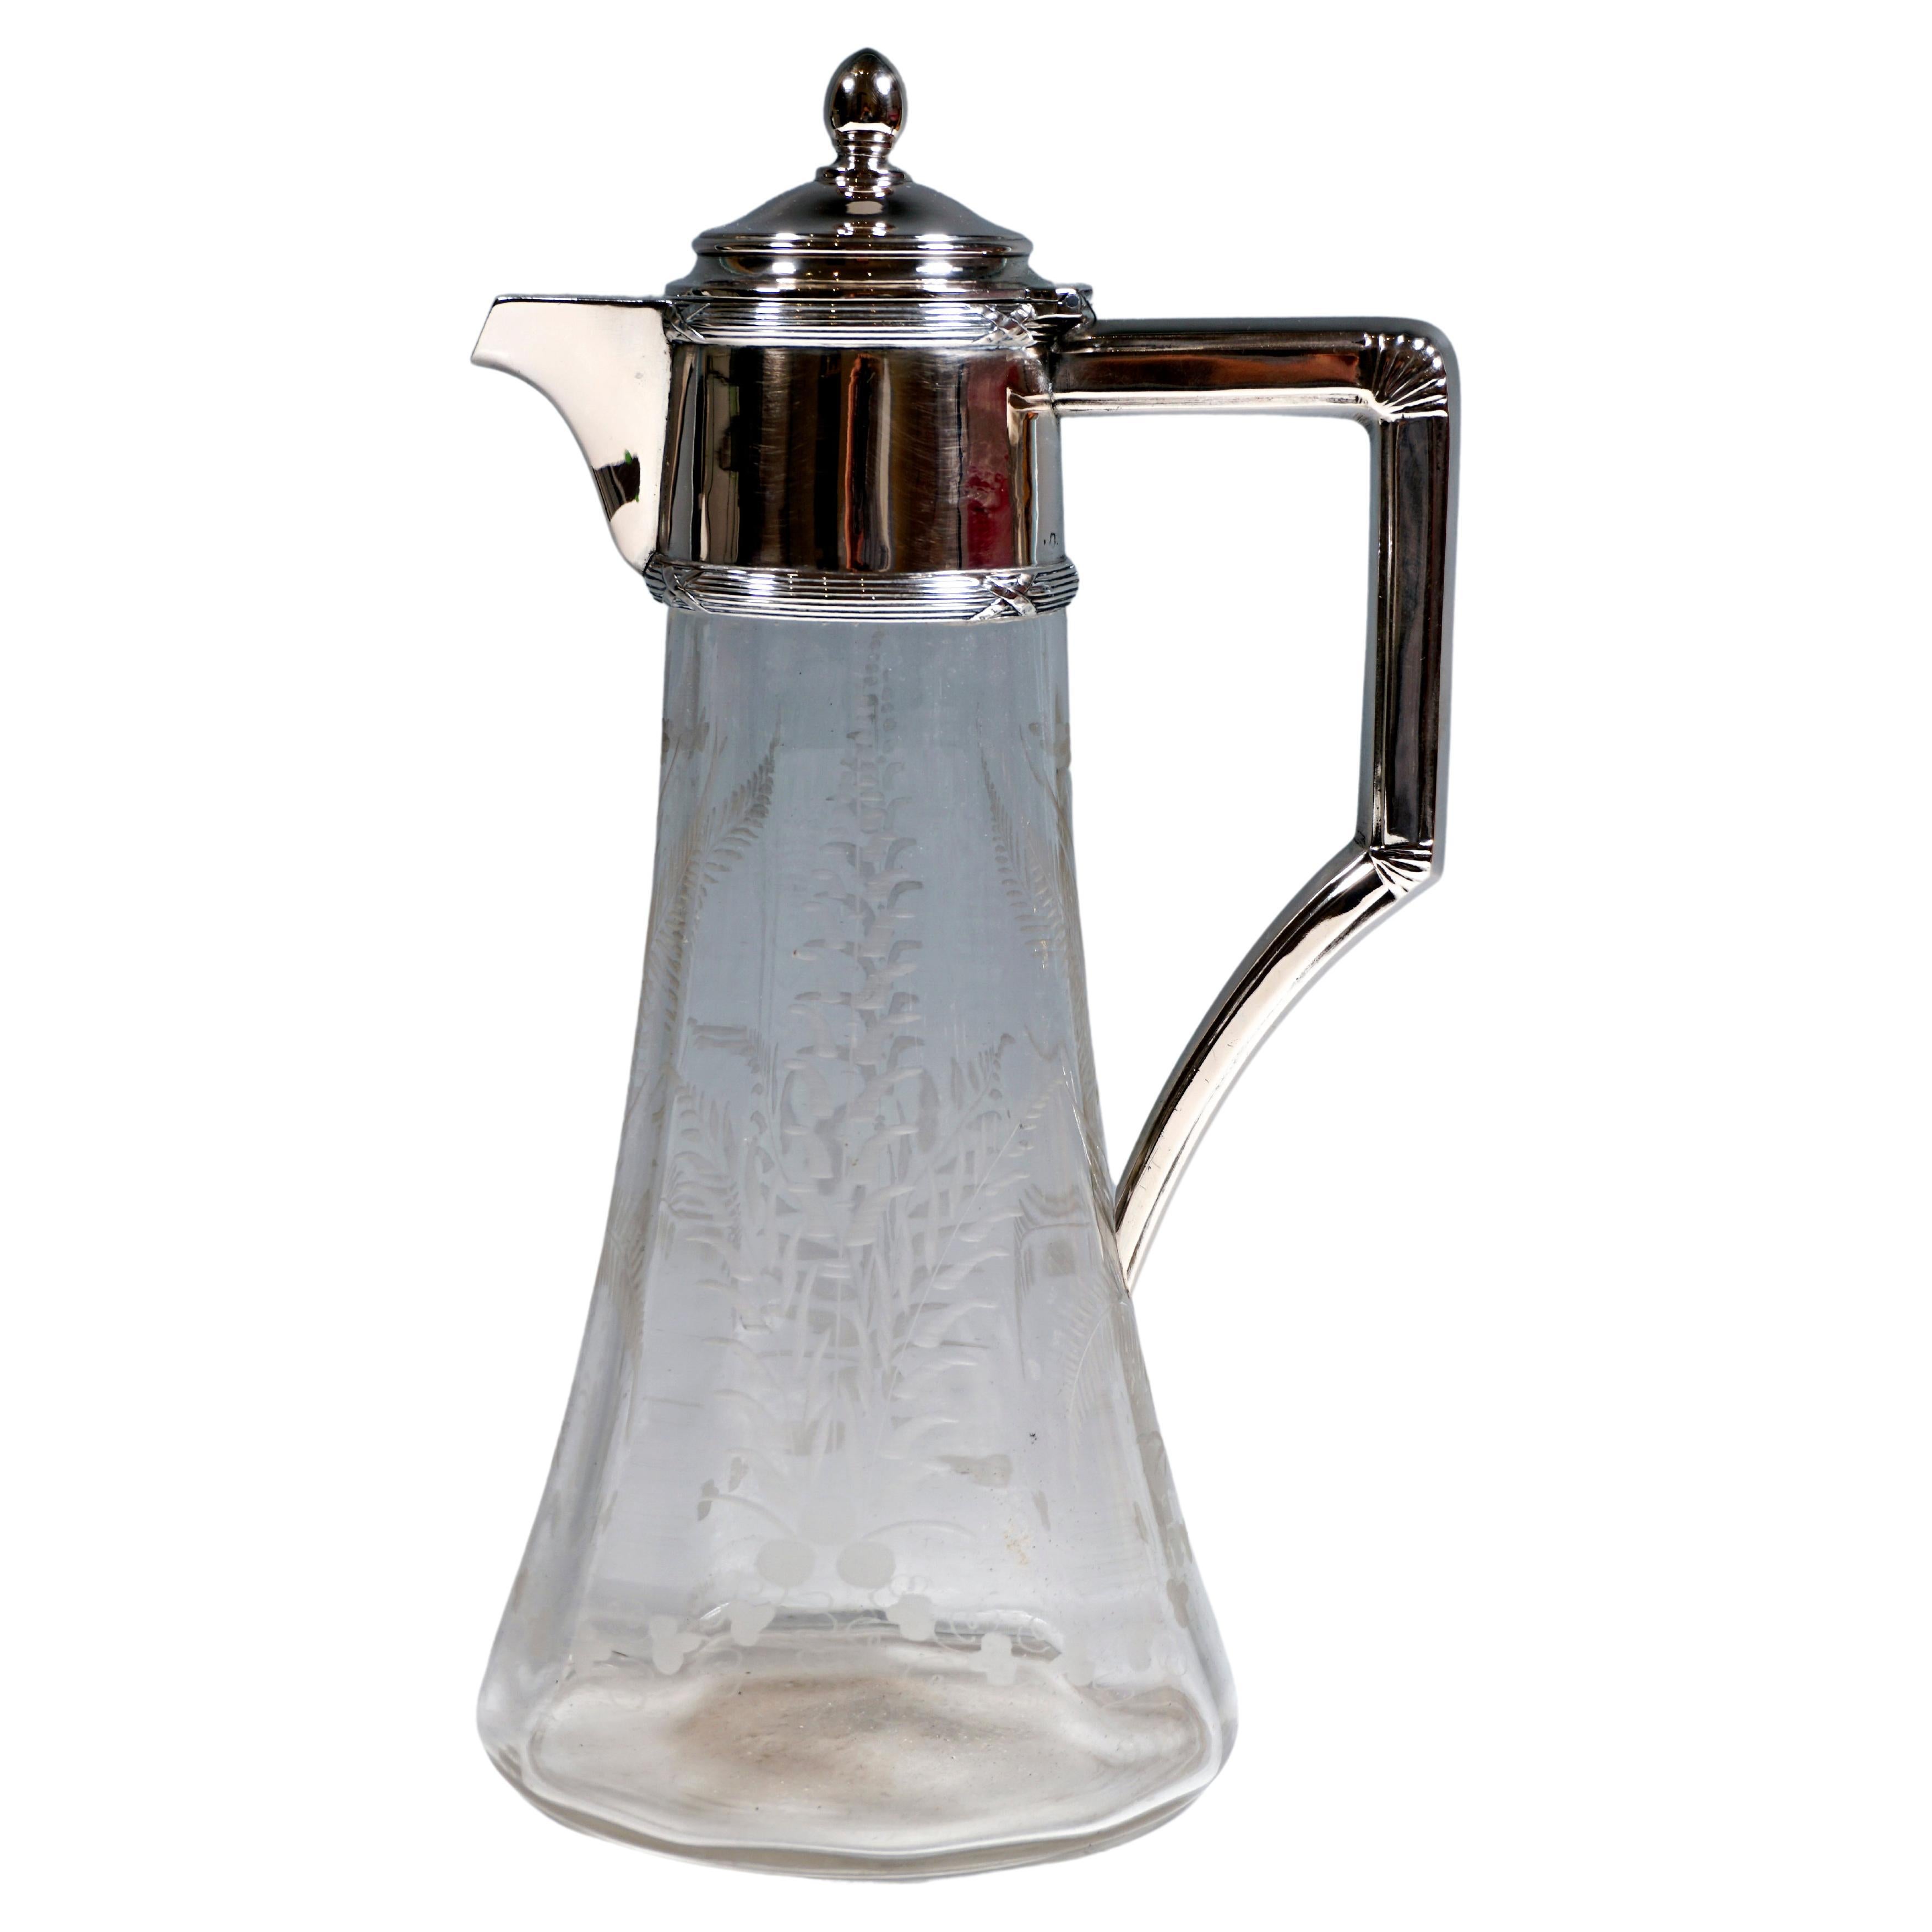 Art Nouveau Glass Carafe With Silver Fitting, by Alexander Sturm Vienna